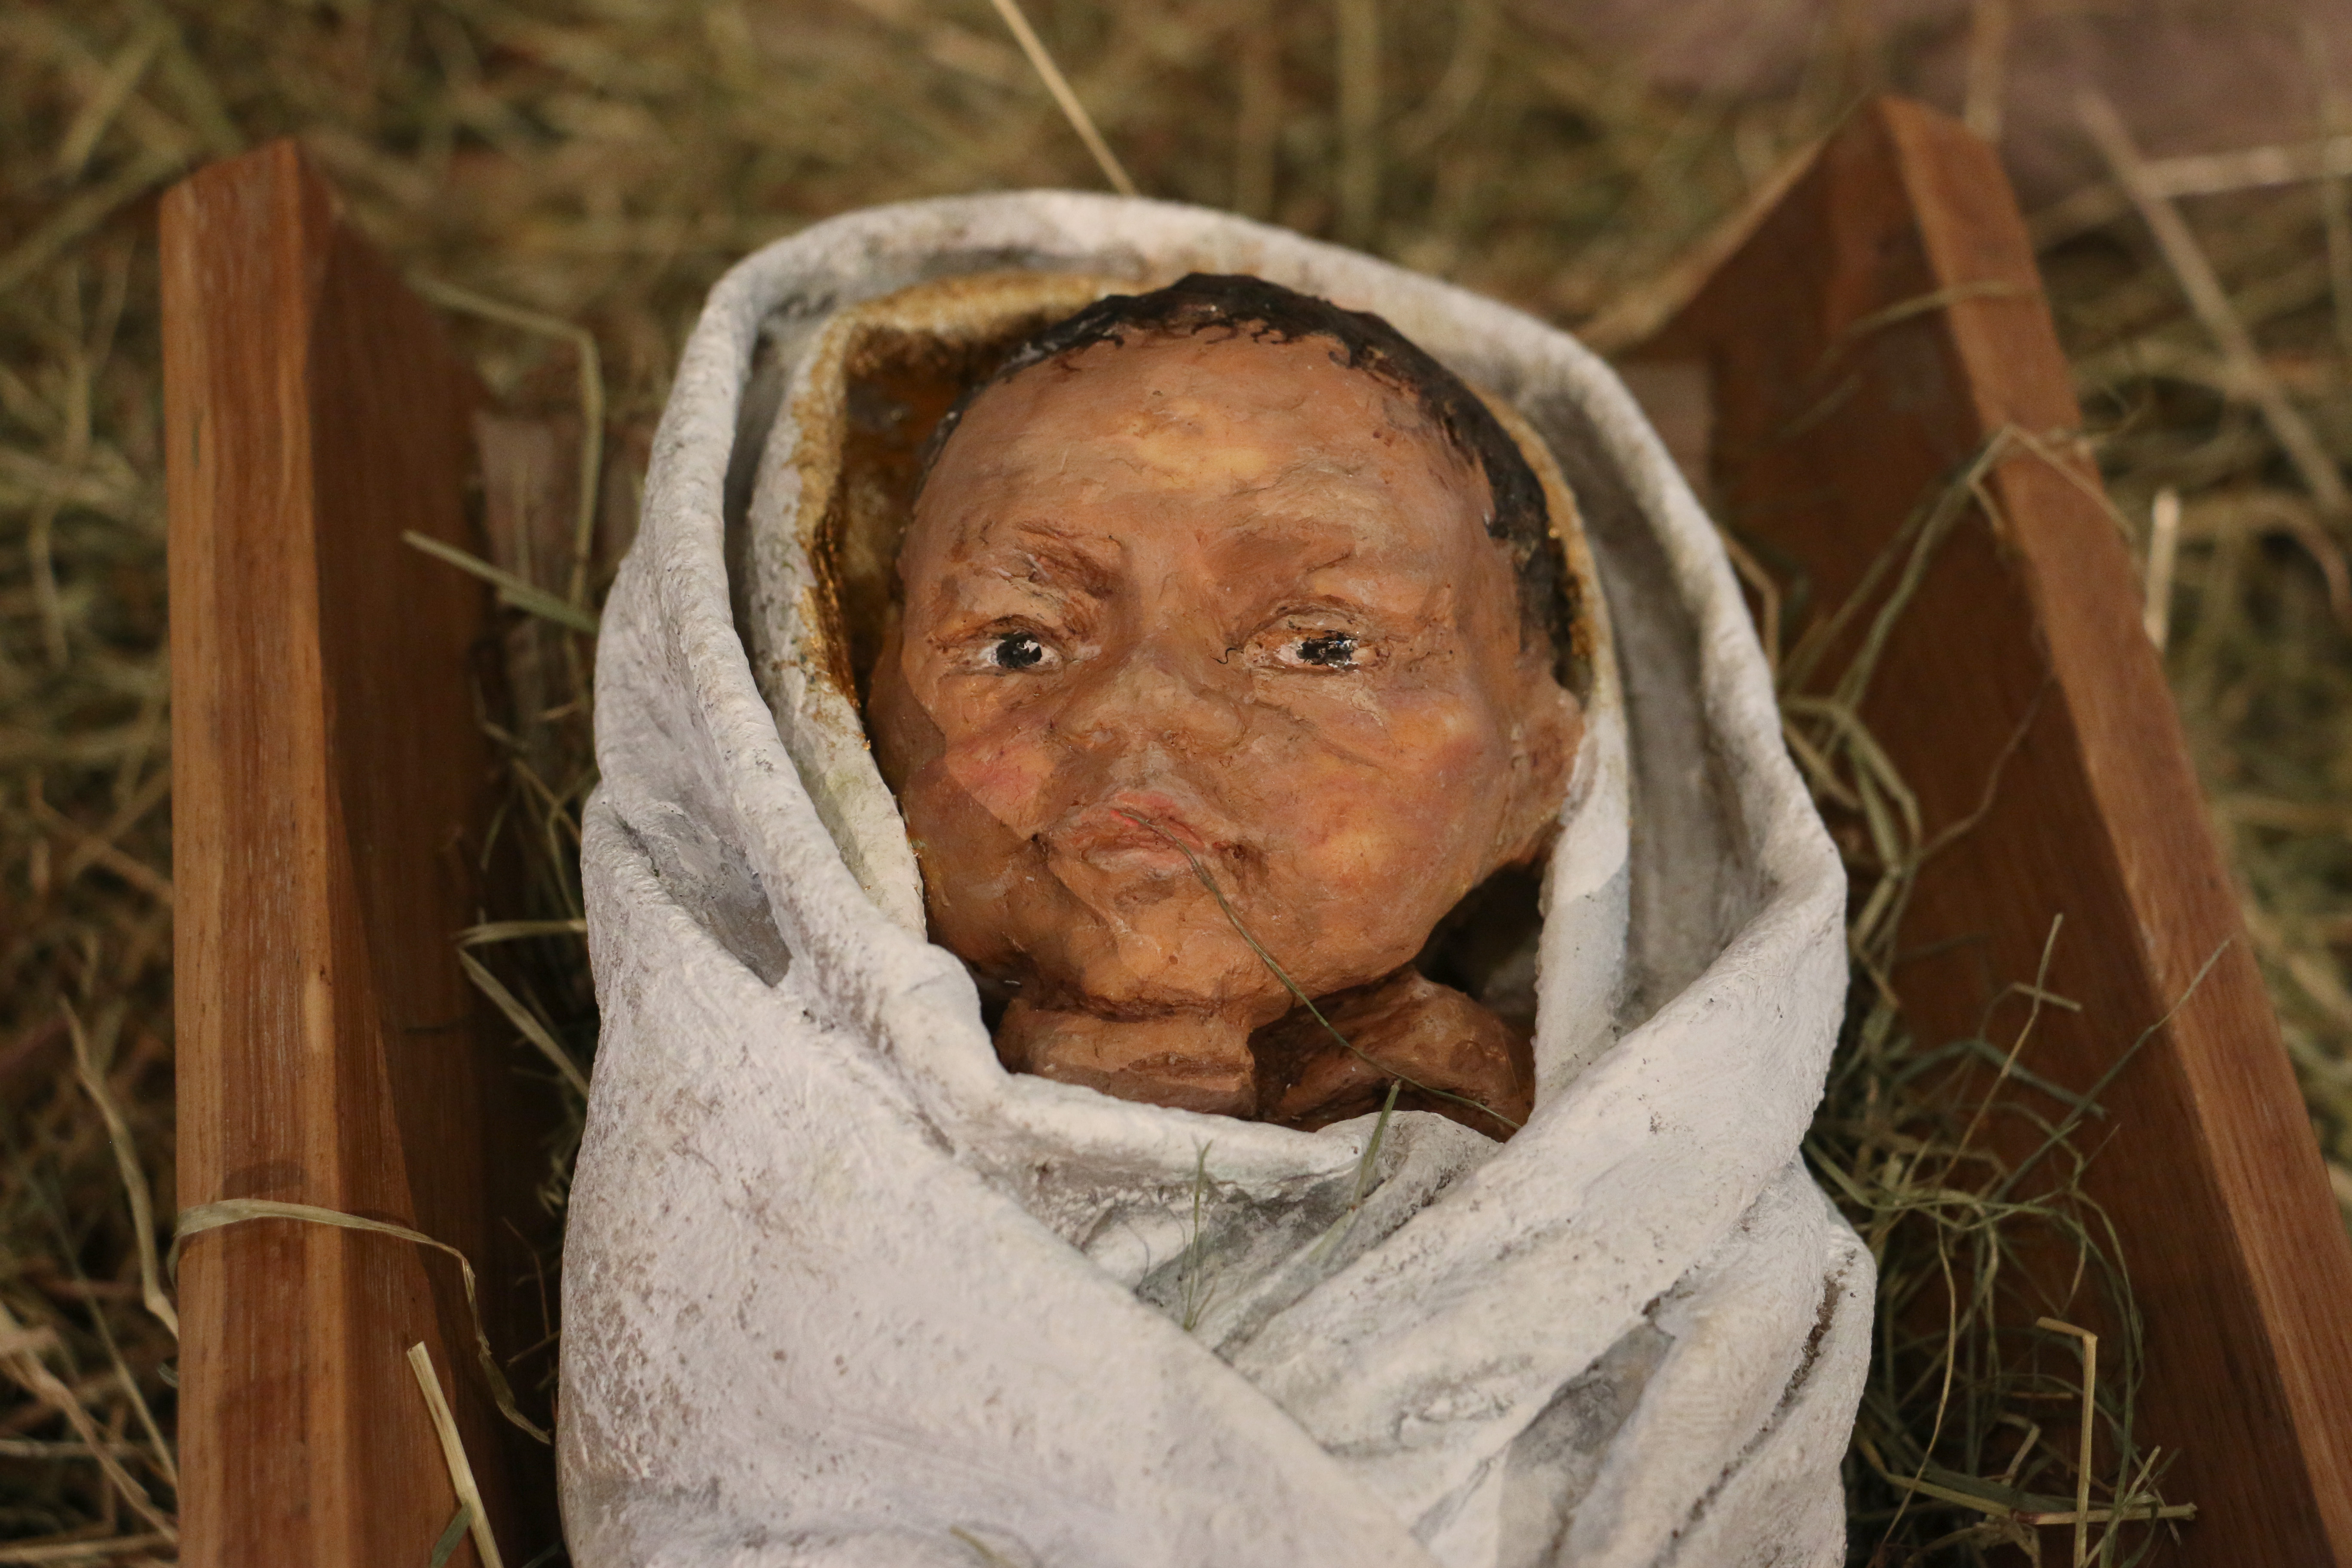 Close up of the Christ child face swaddled in white cloth, with the hands resting below the chin